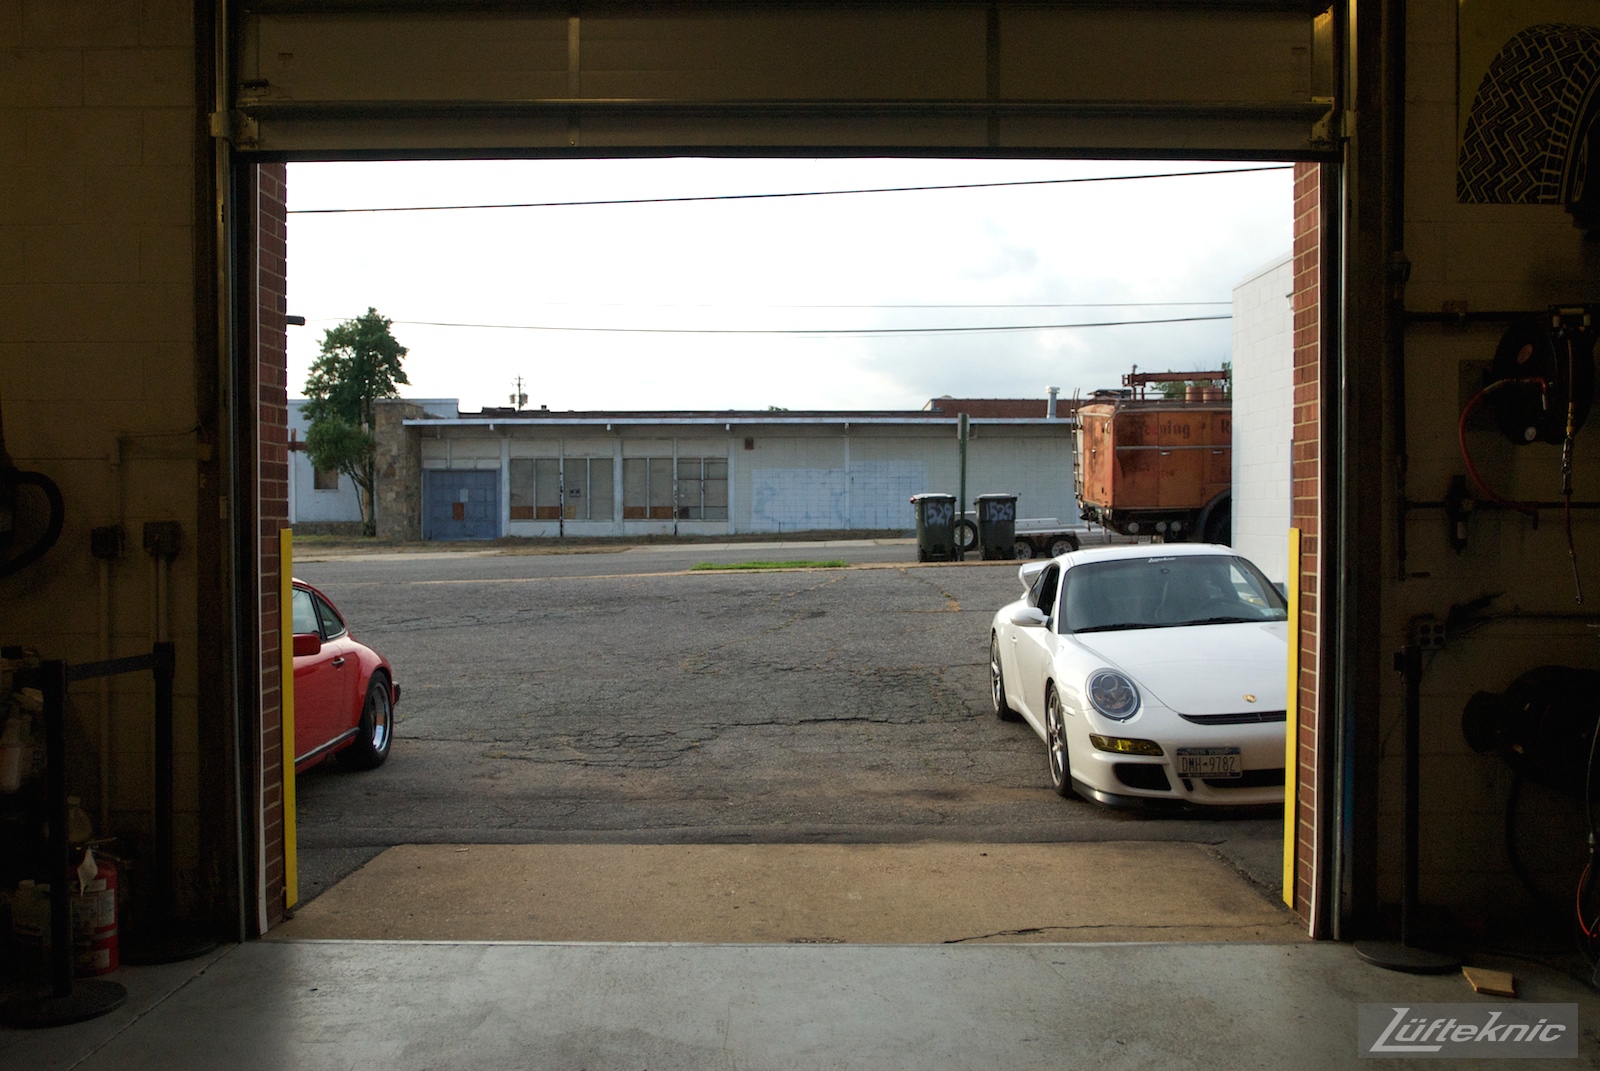 A white 997 GT3 sitting just outside the Lufteknic shop door with other Porsches shown.